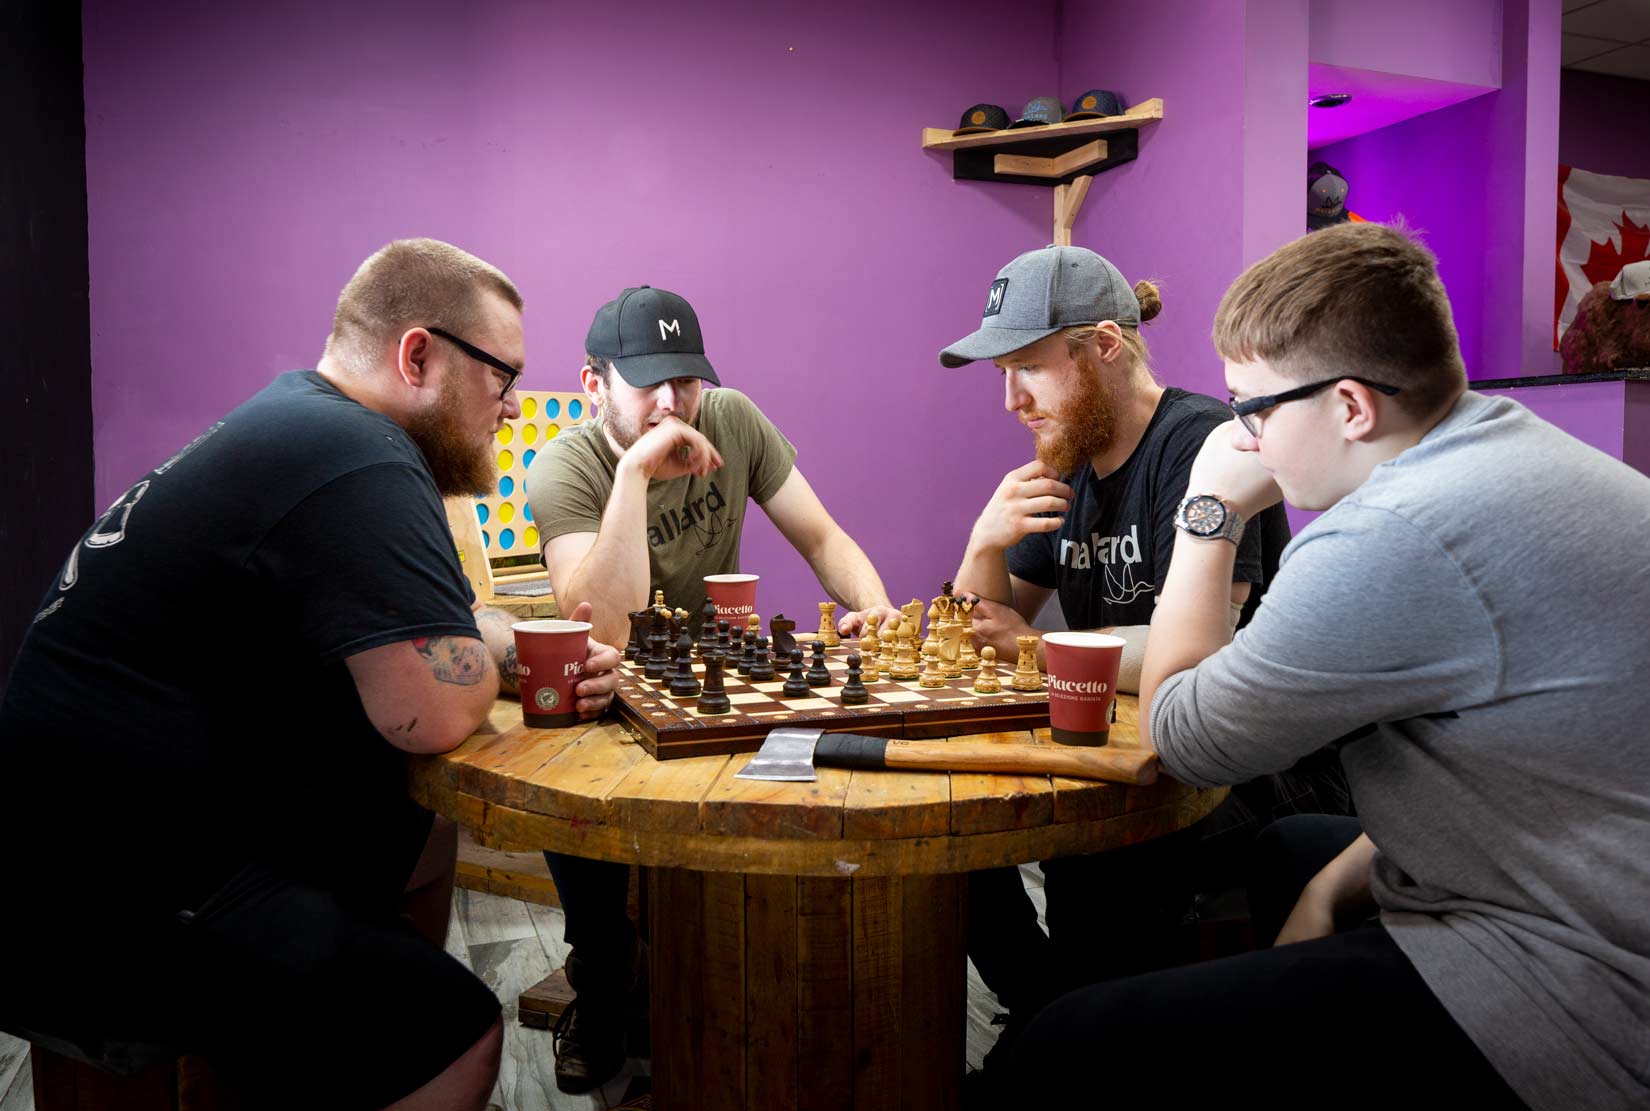 Chess player sitting at a round table with two spectators and an axe in the table